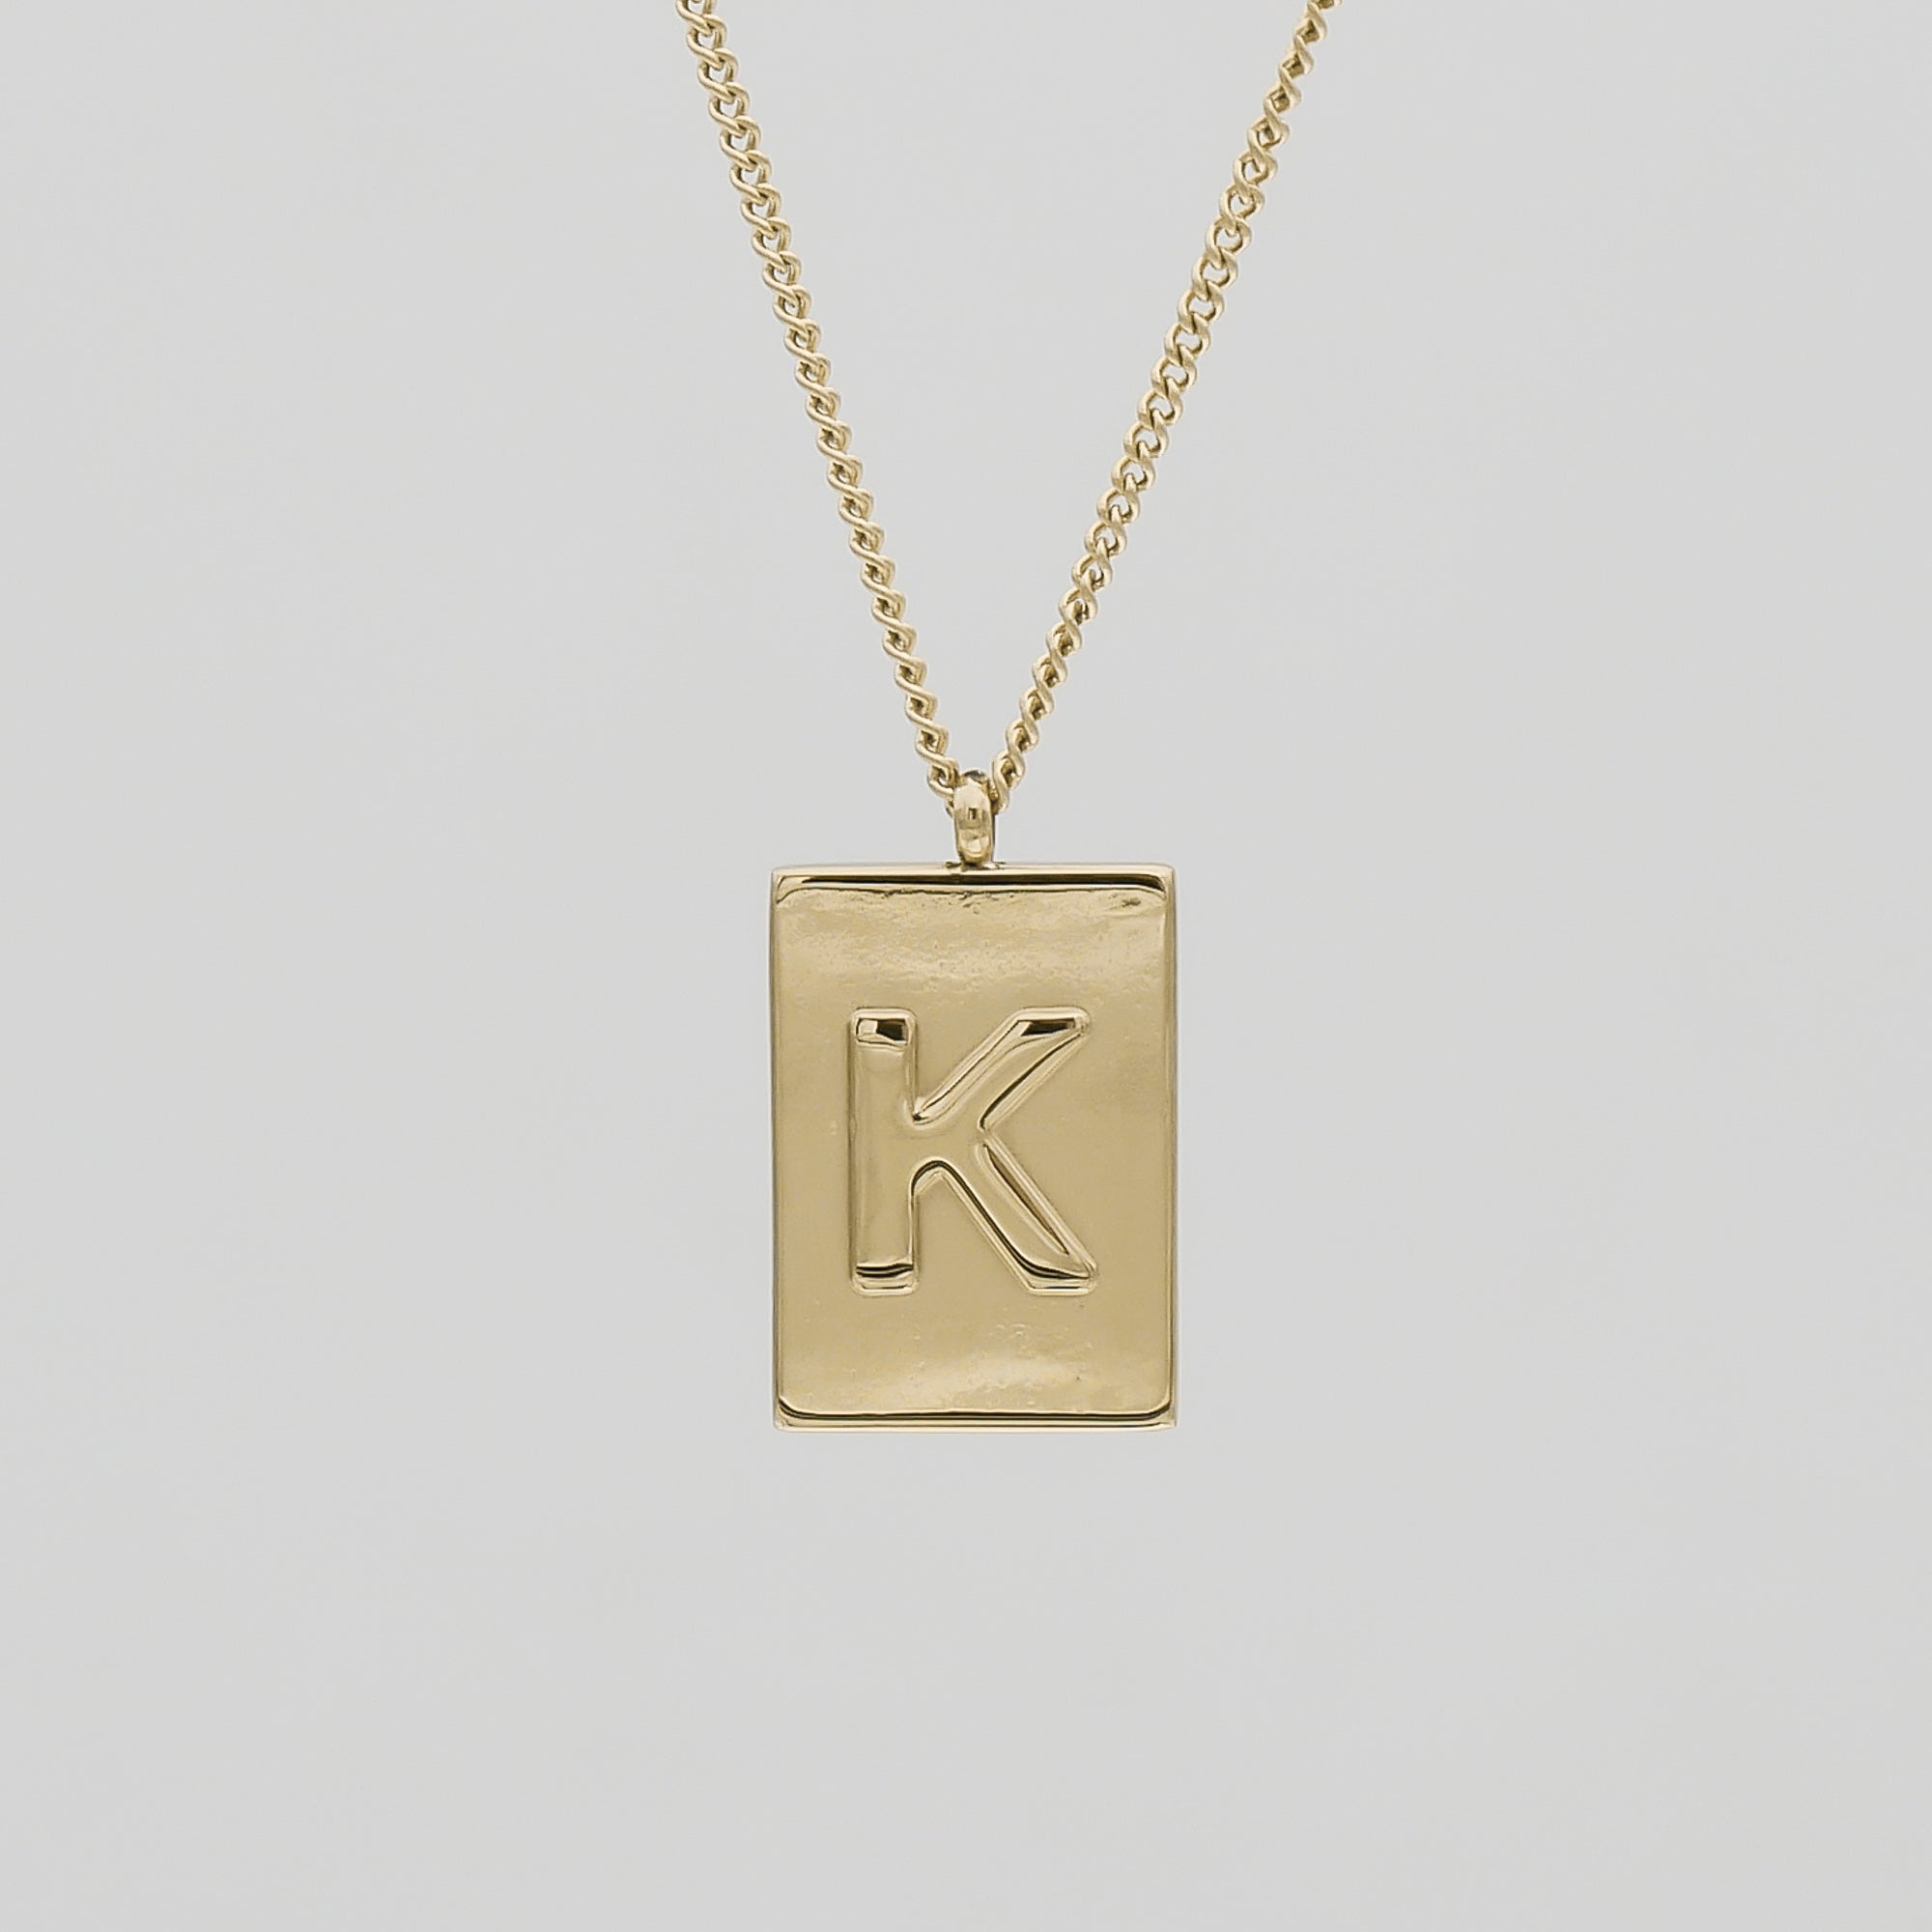 Athena custom initial Gold pendant Necklace, letter K by PRYA